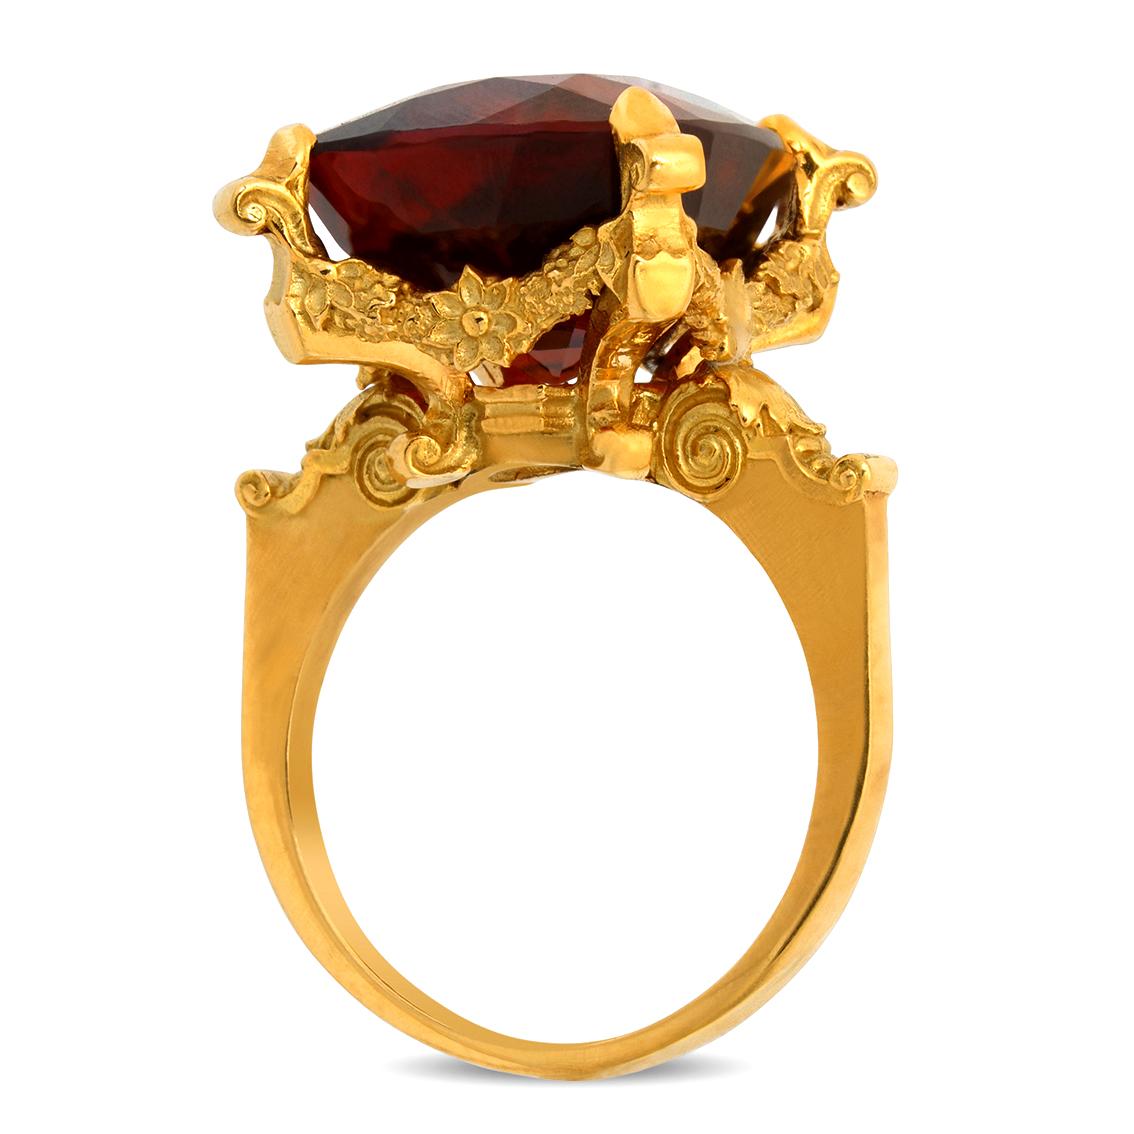 Handcrafted in 18kt yellow gold this lavish ring features a deep wine coloured central 20.98ct cushion cut garnet aloft a signature William Llewellyn Griffiths garland setting resplendent amongst intricate flowers, baroque scrollwork and cross